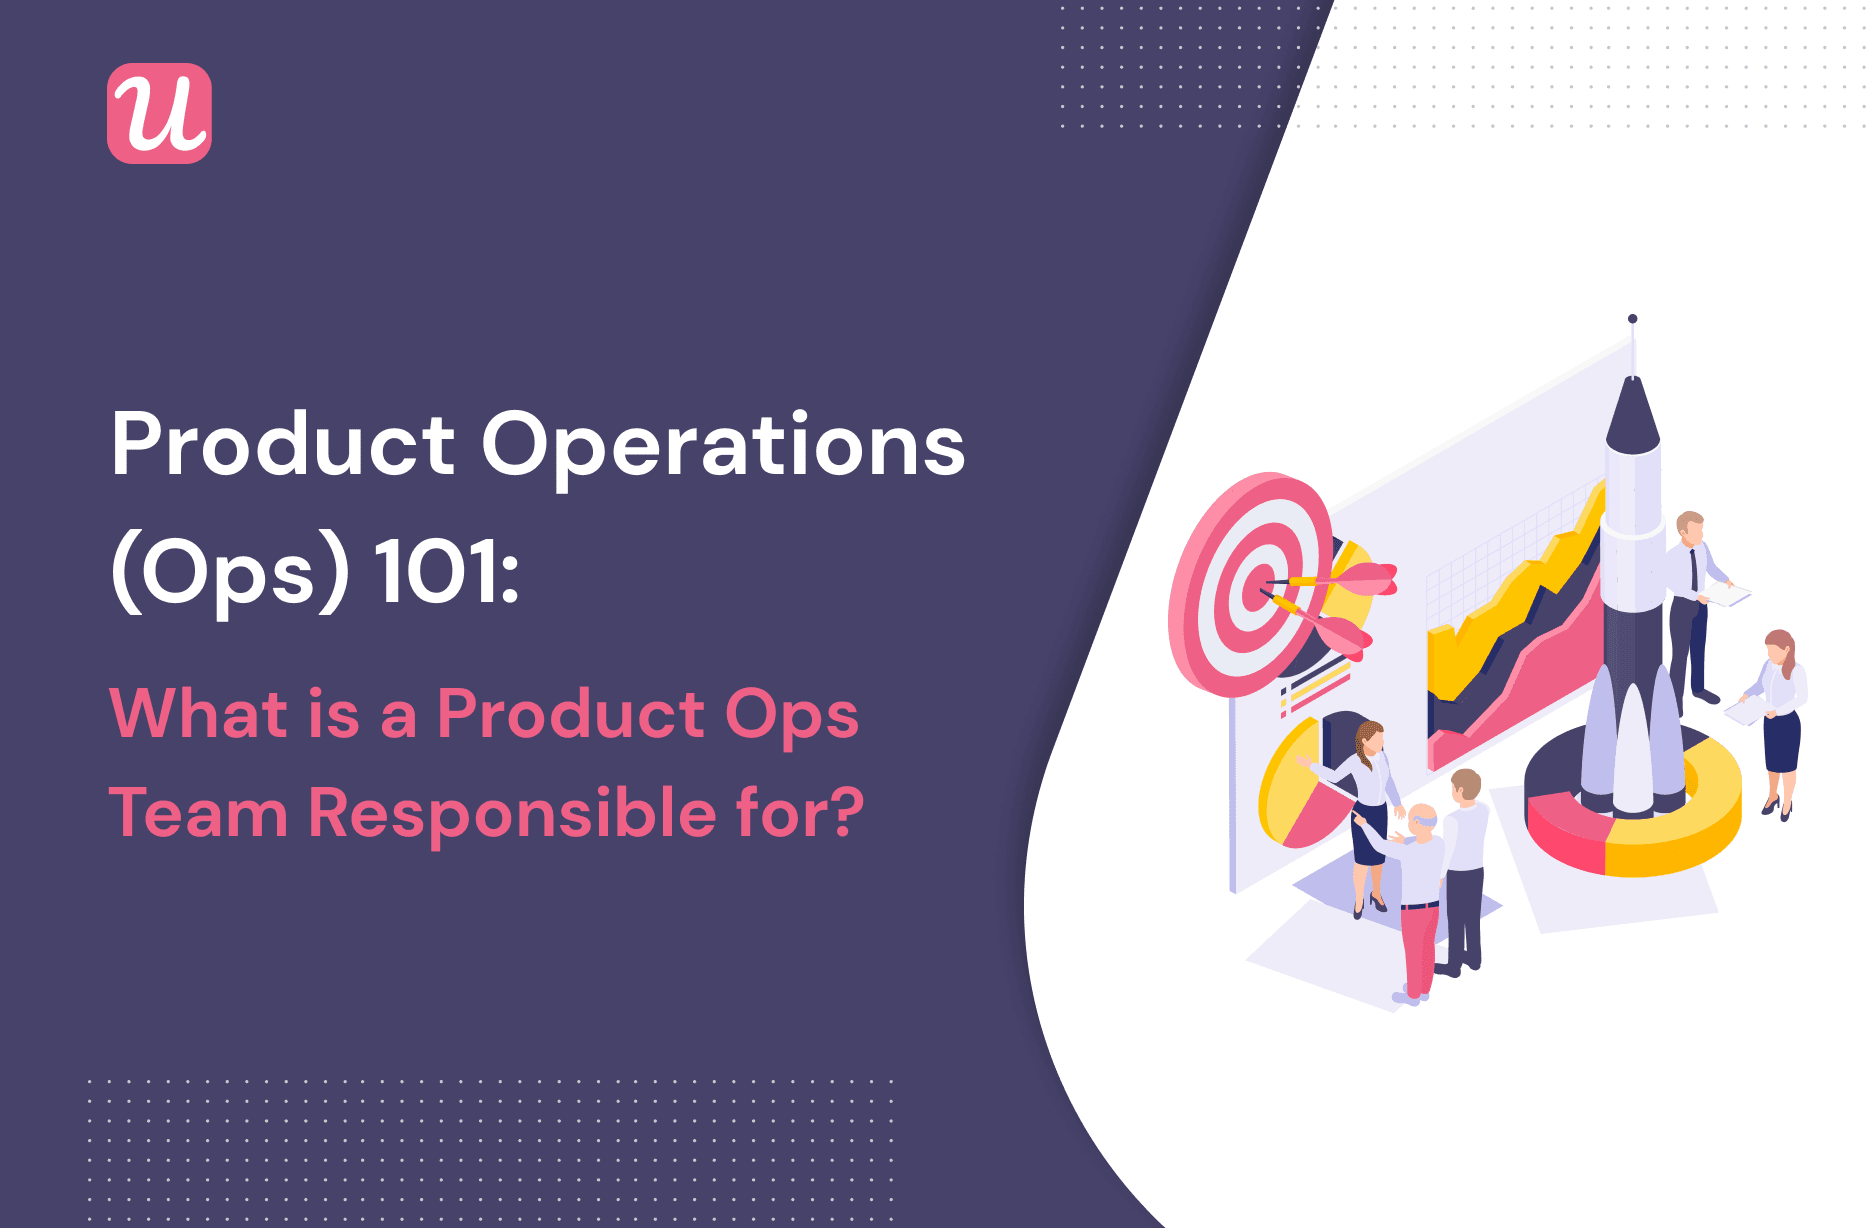 Product Operations (Ops) 101: What is a Product Ops Team Responsible For?